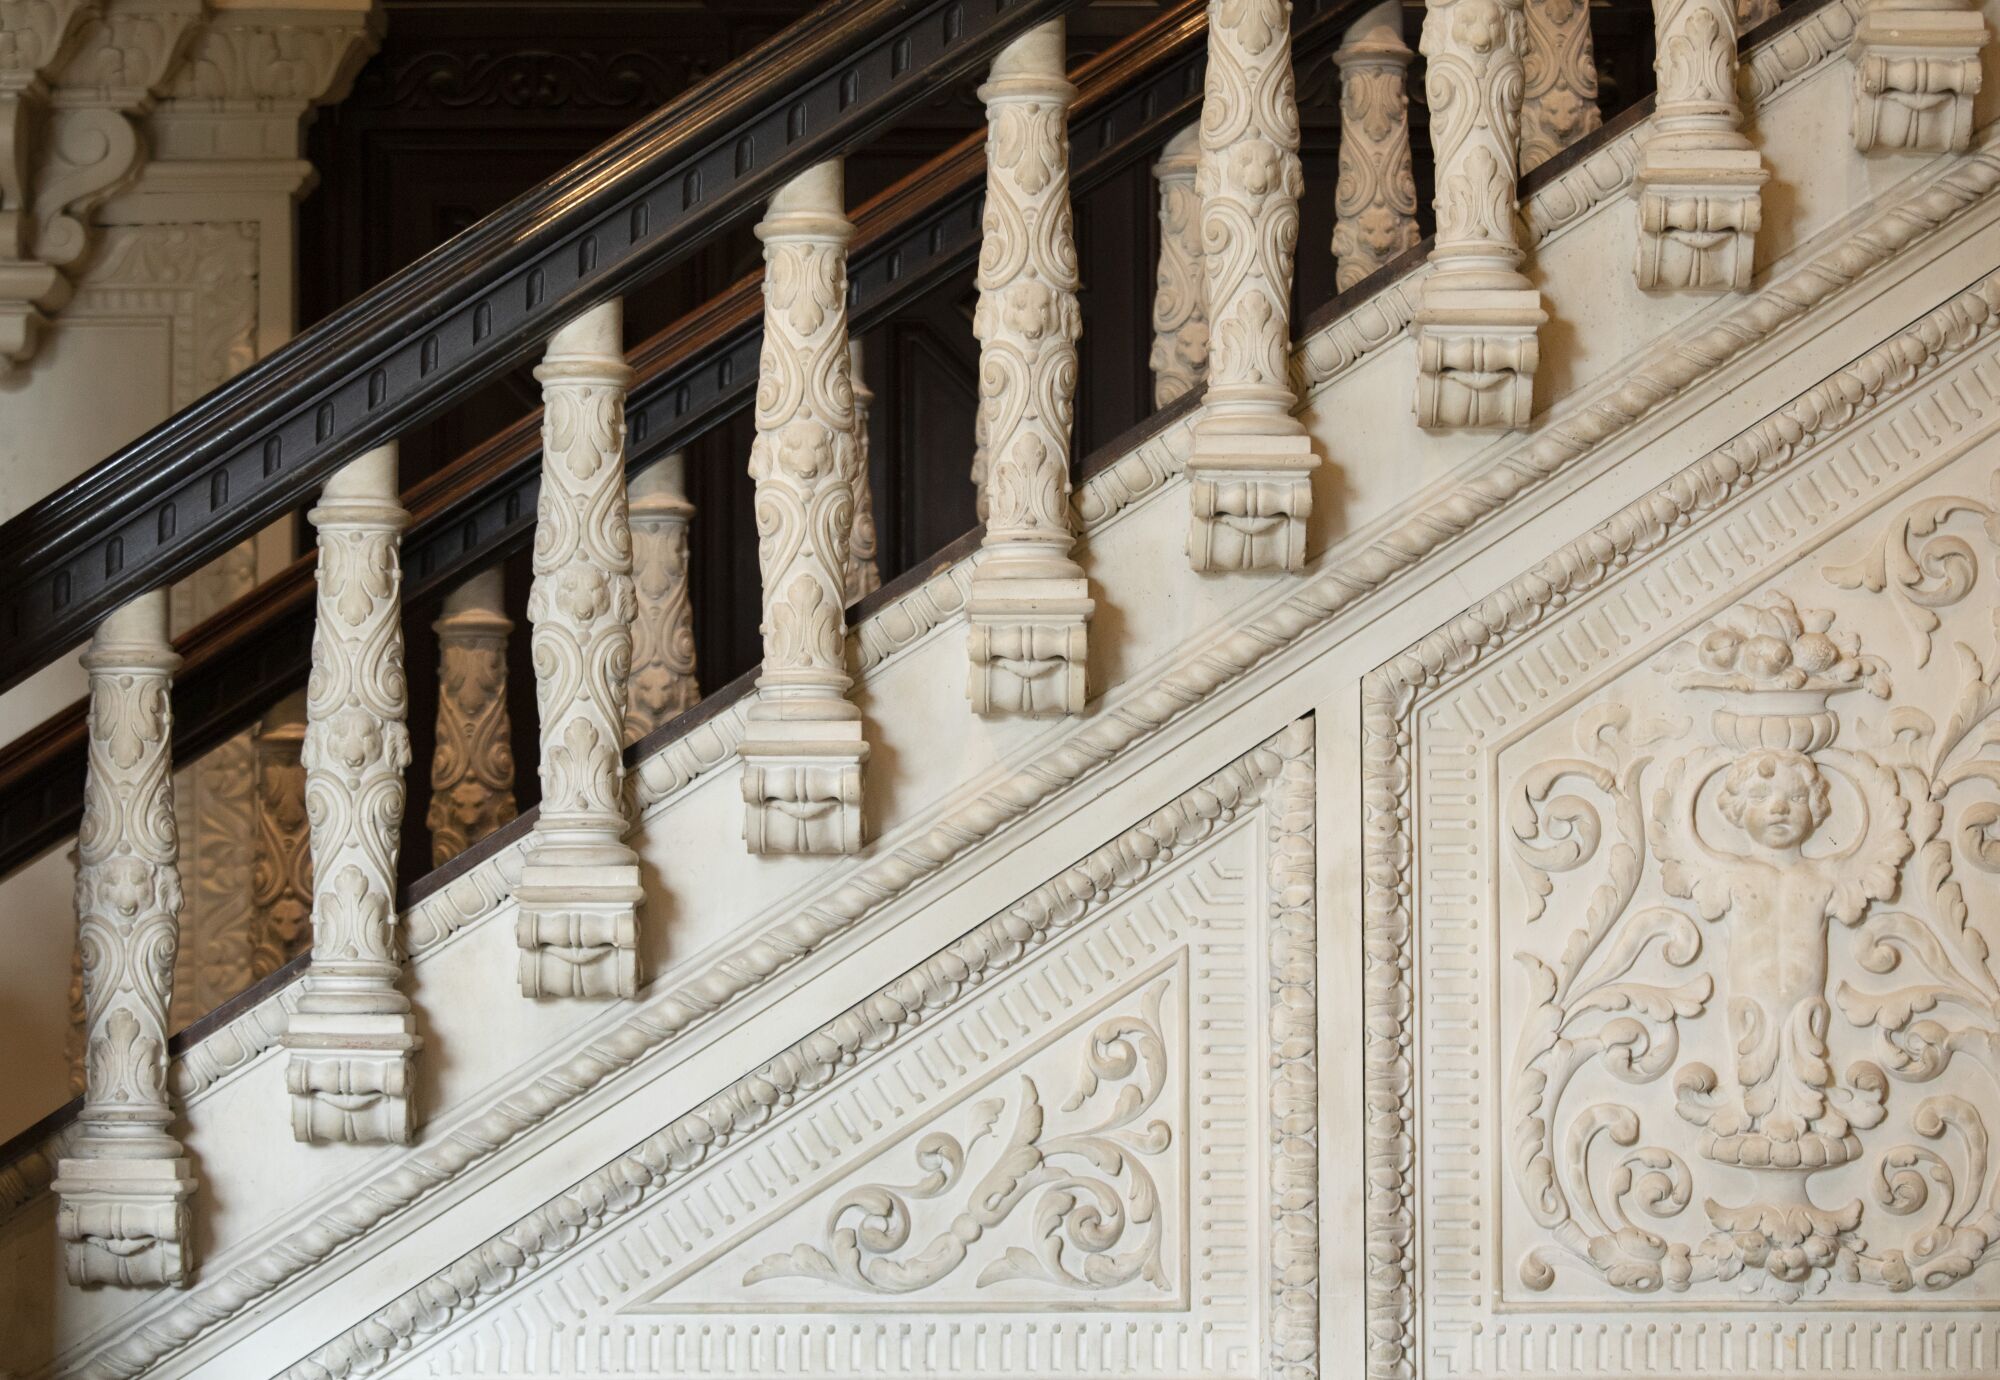 A detail shot of a marble staircase shows ornate reliefs of flowers and leaves and an angel bearing a basket of fruit